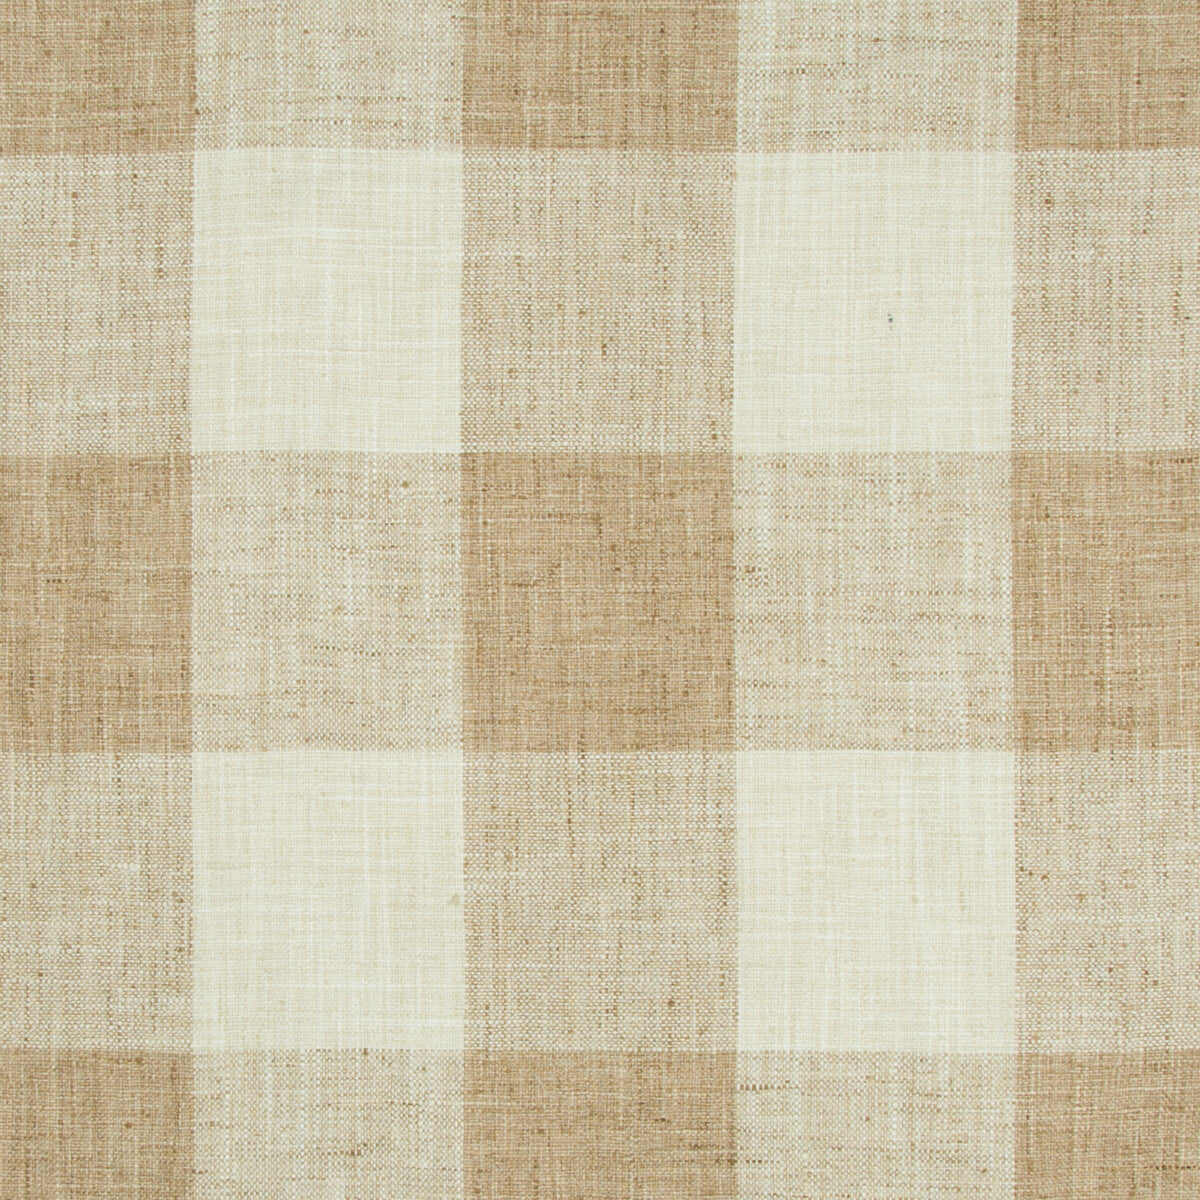 Kravet Basics fabric in 34090-1116 color - pattern 34090.1116.0 - by Kravet Basics in the Bungalow Chic II collection